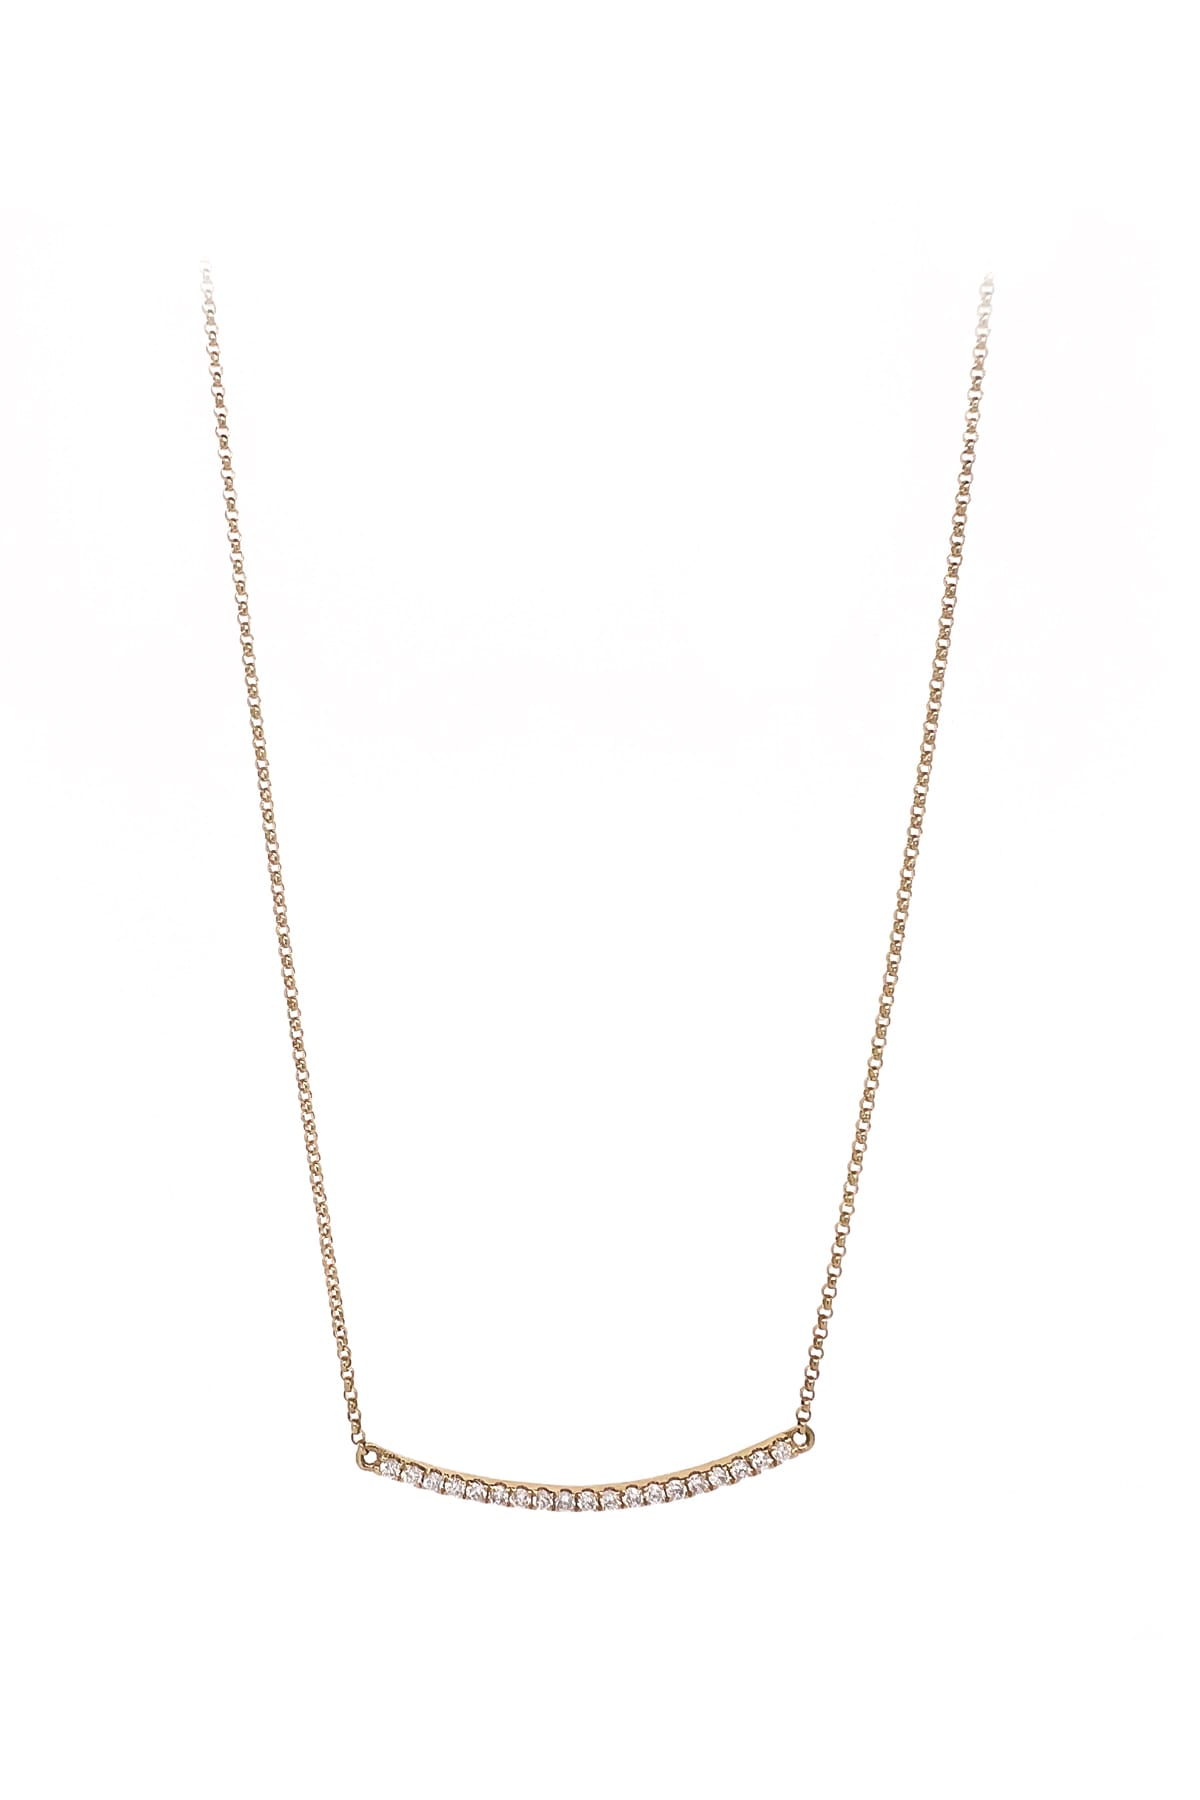 18 Carat Yellow Gold Curved Bar Necklace available at LeGassick Diamonds and Jewellery Gold Coast, Australia.